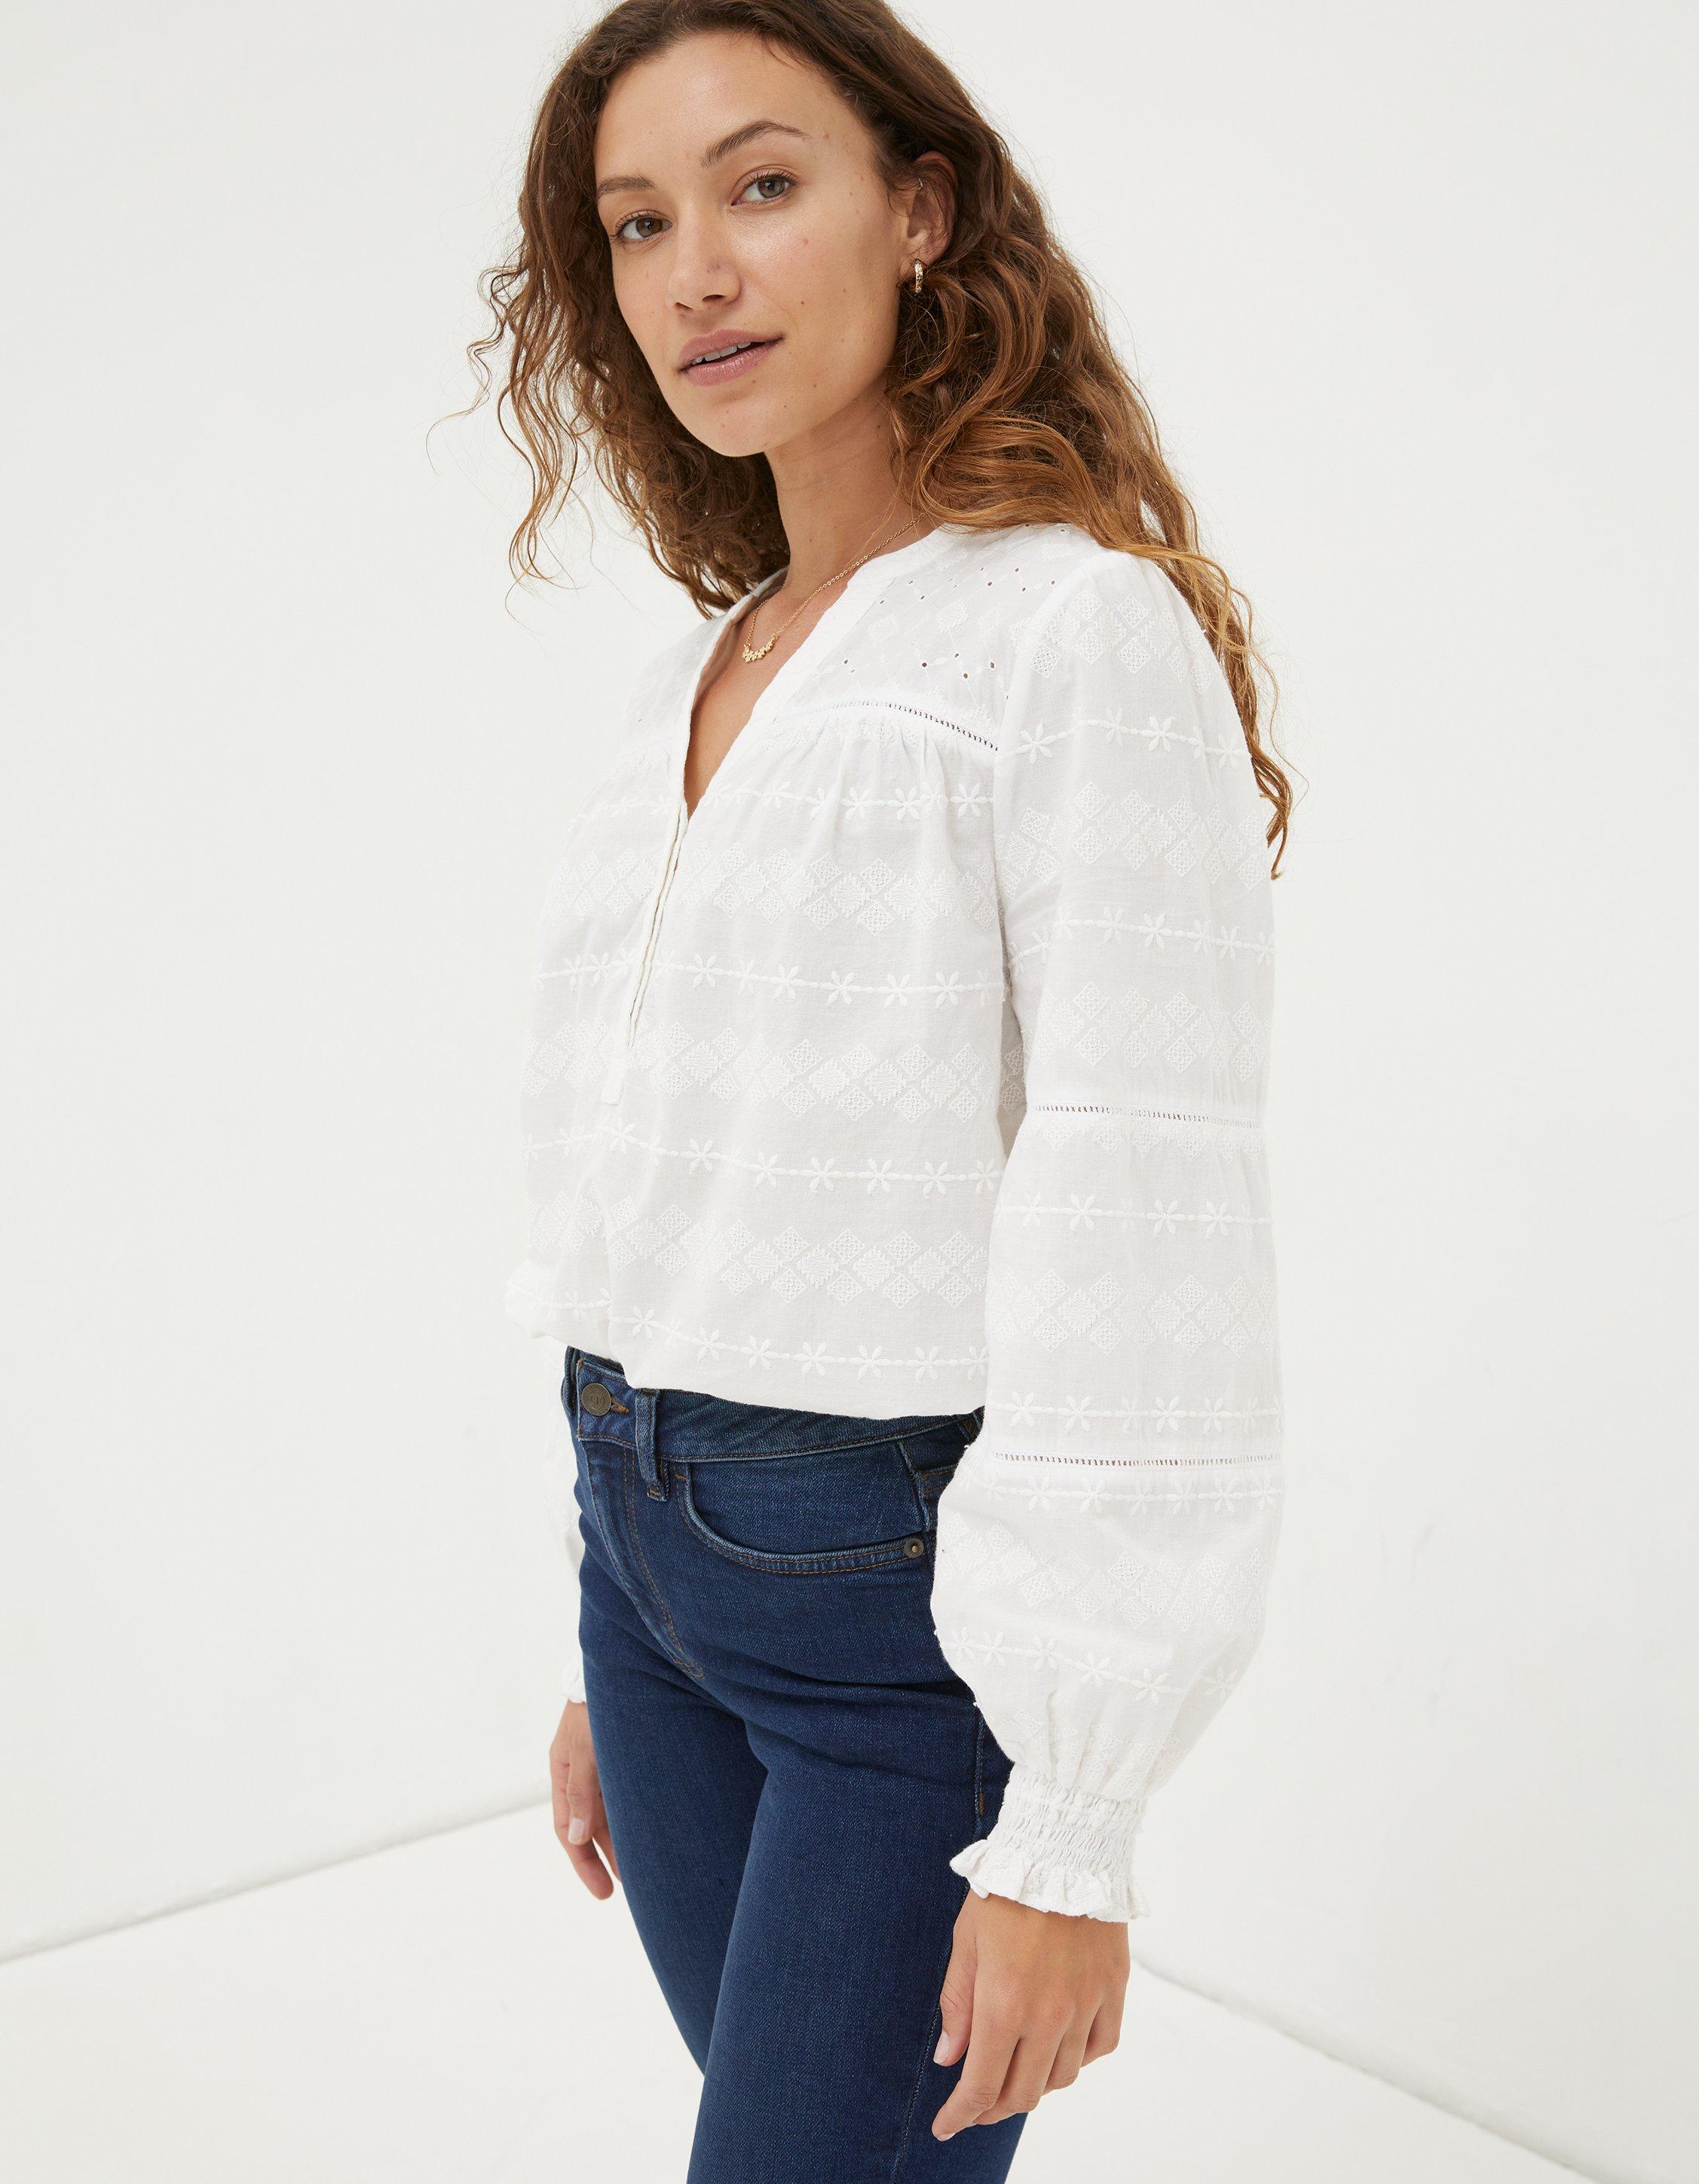 Poppy Embroidered Blouse, Shirts & Blouses | FatFace.com